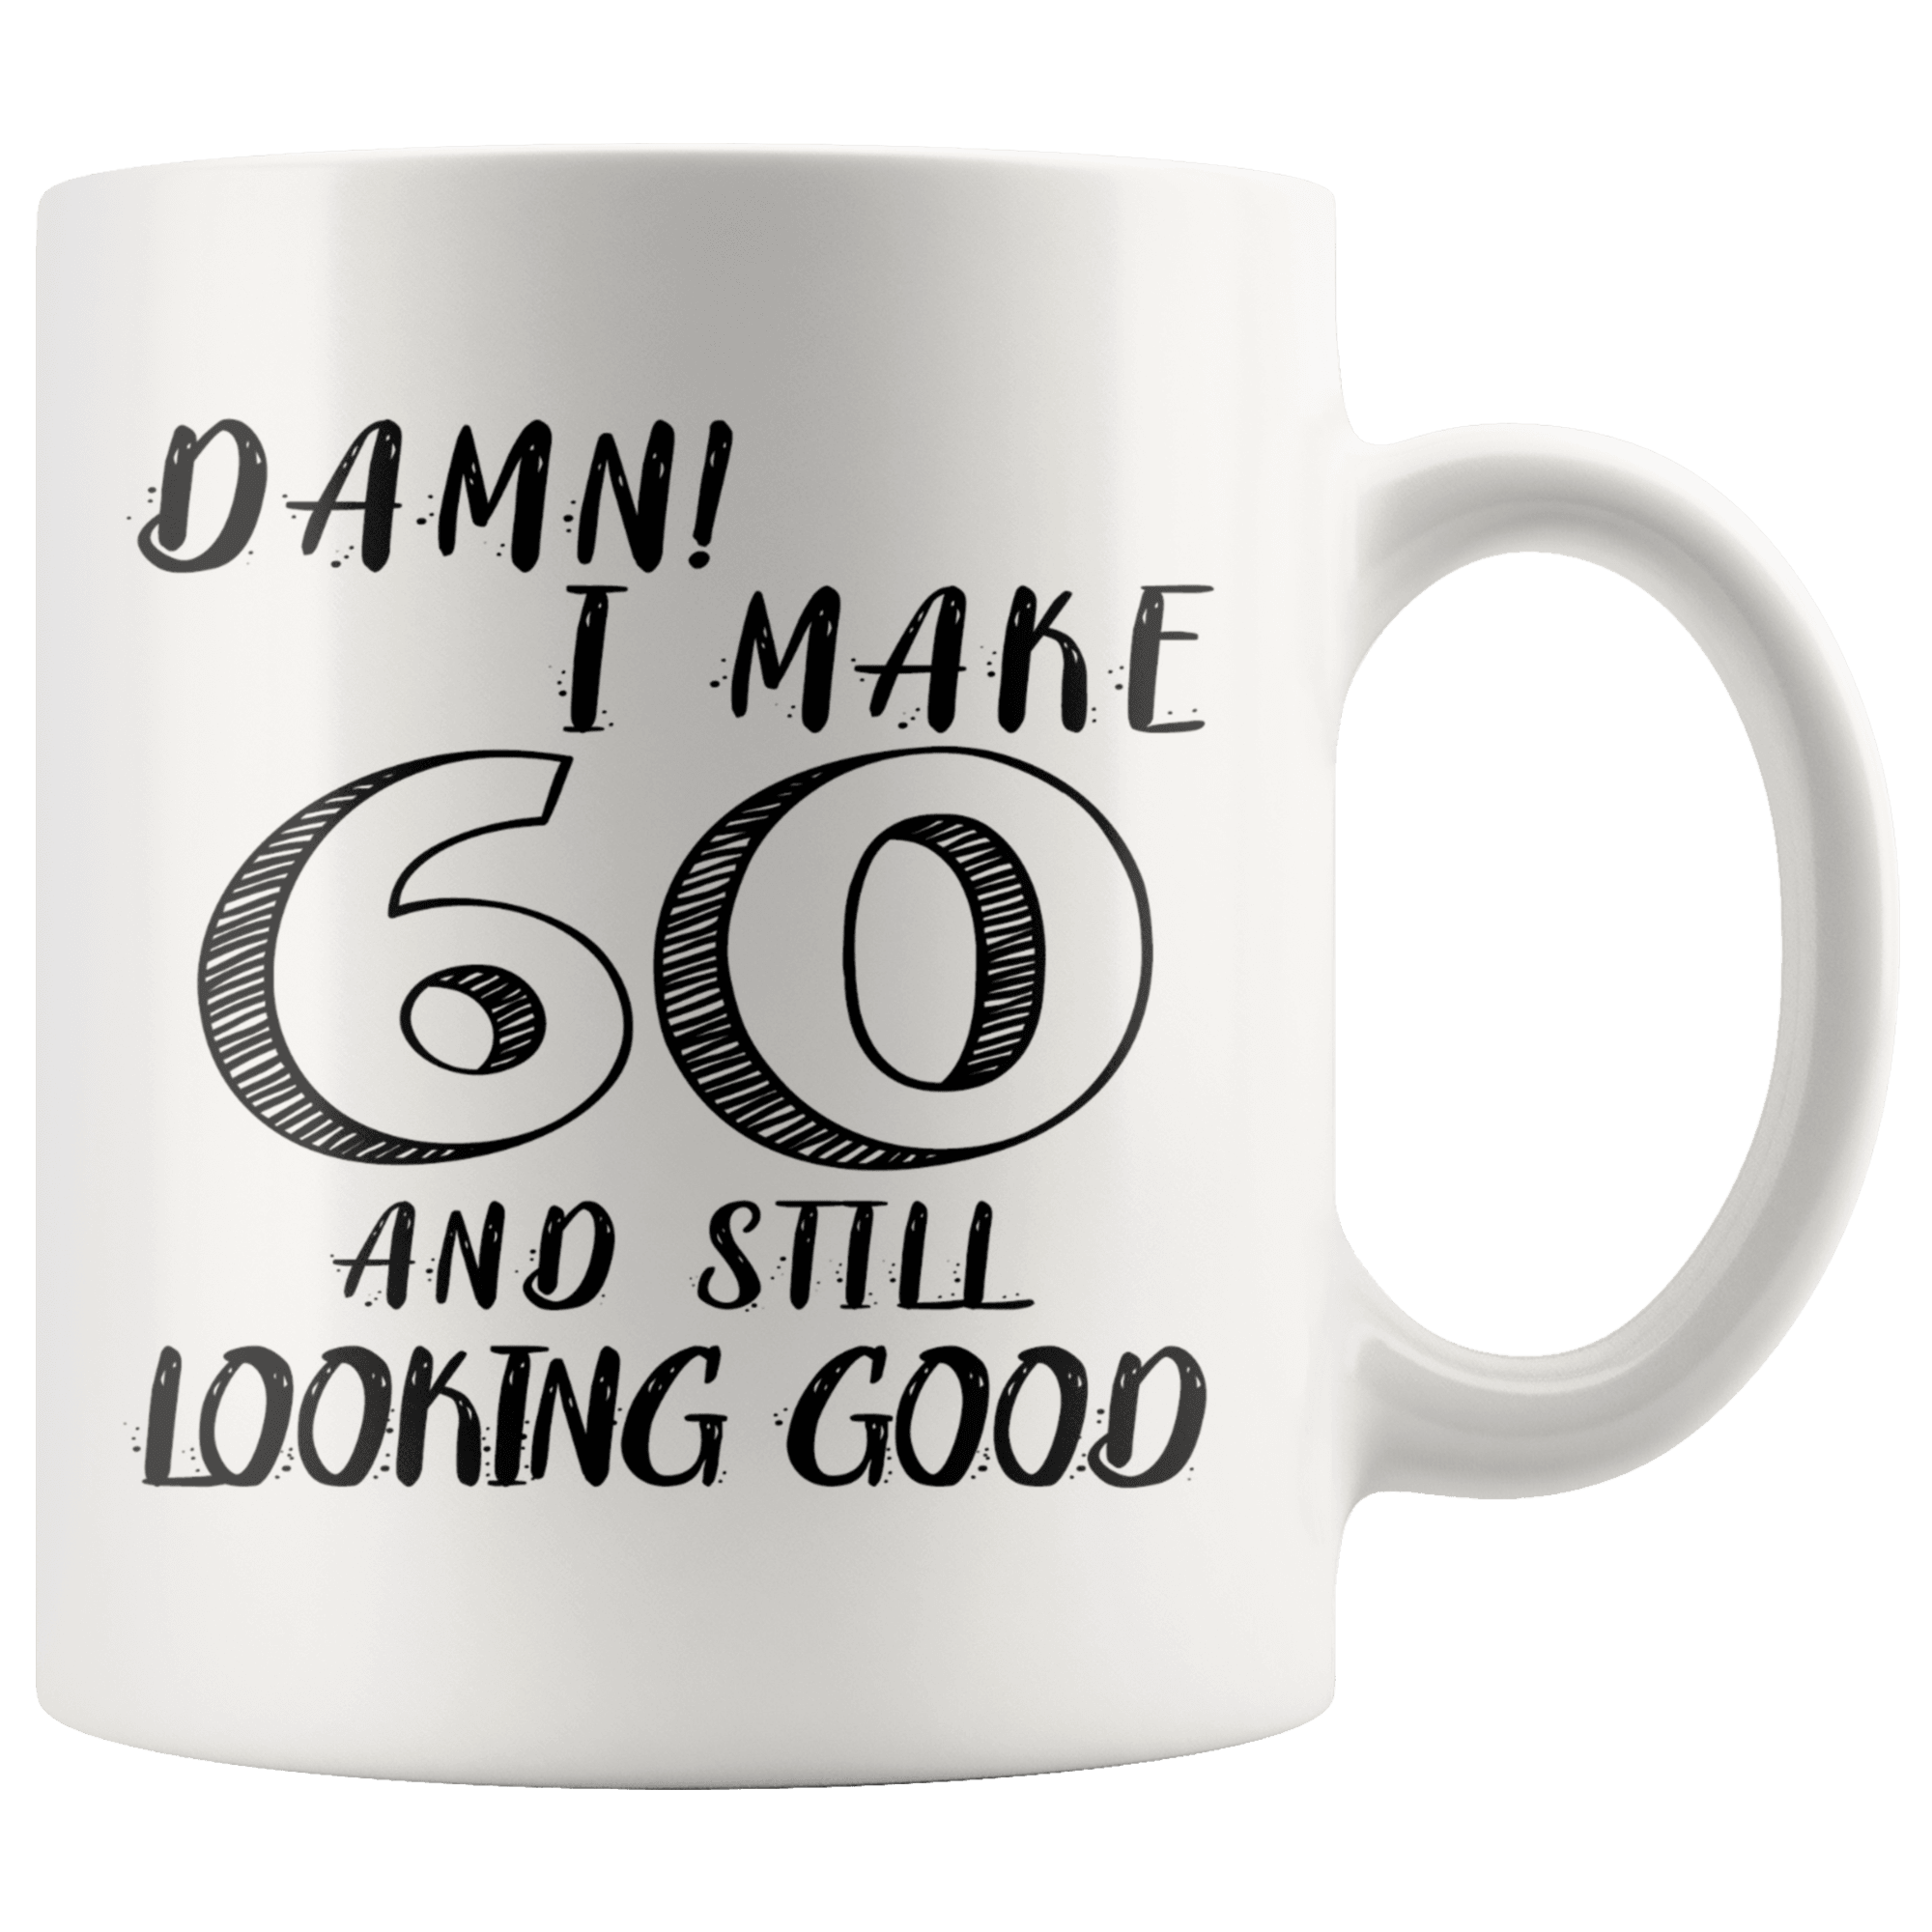 Damn! I Make 60 And Still Looking Good - 60th Birthday Coffee Mug For Man & Woman - Great Gift For Friends, Relatives, Colleagues or Family Members Celebrating 60 Years Old Birthday - SPCM